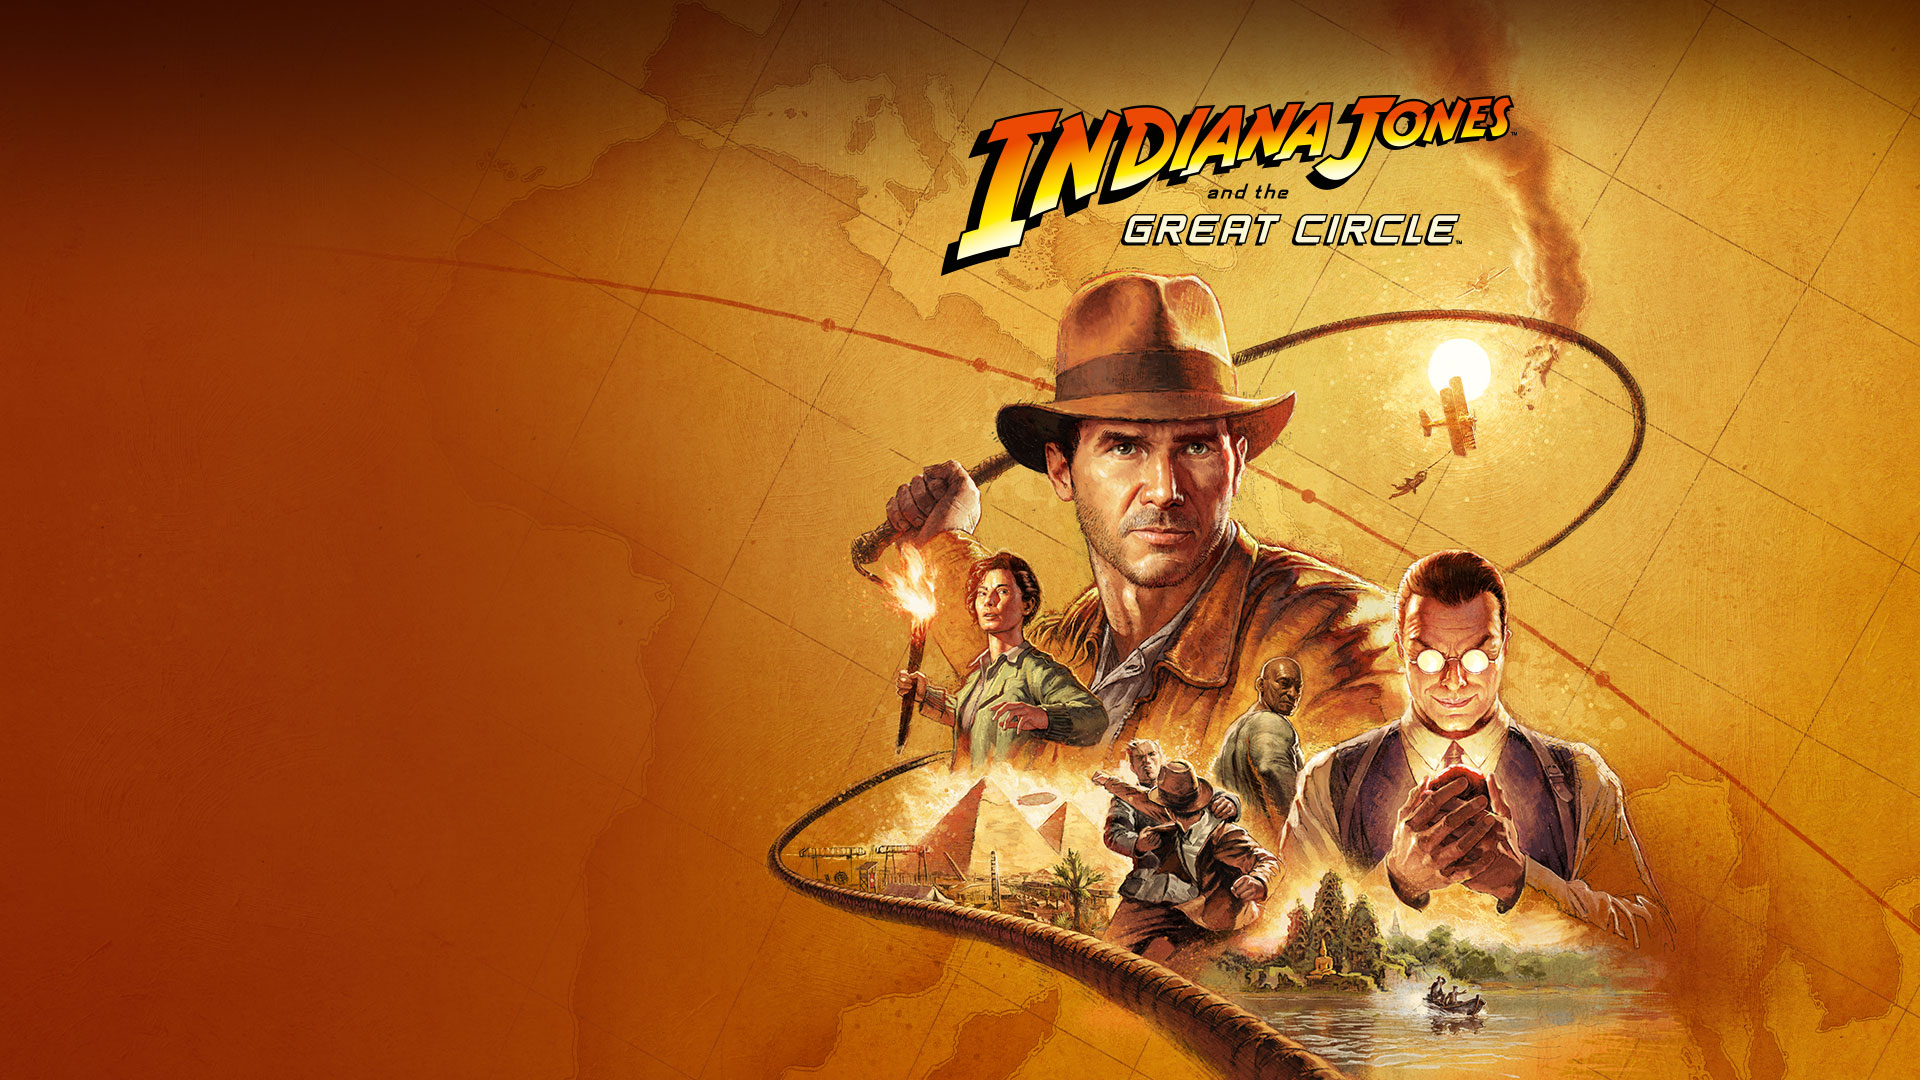 Indiana Jones and the Great Circle, a collage of Dr. Jones, his friends and his enemies overlaying a sepia-toned map of the world.